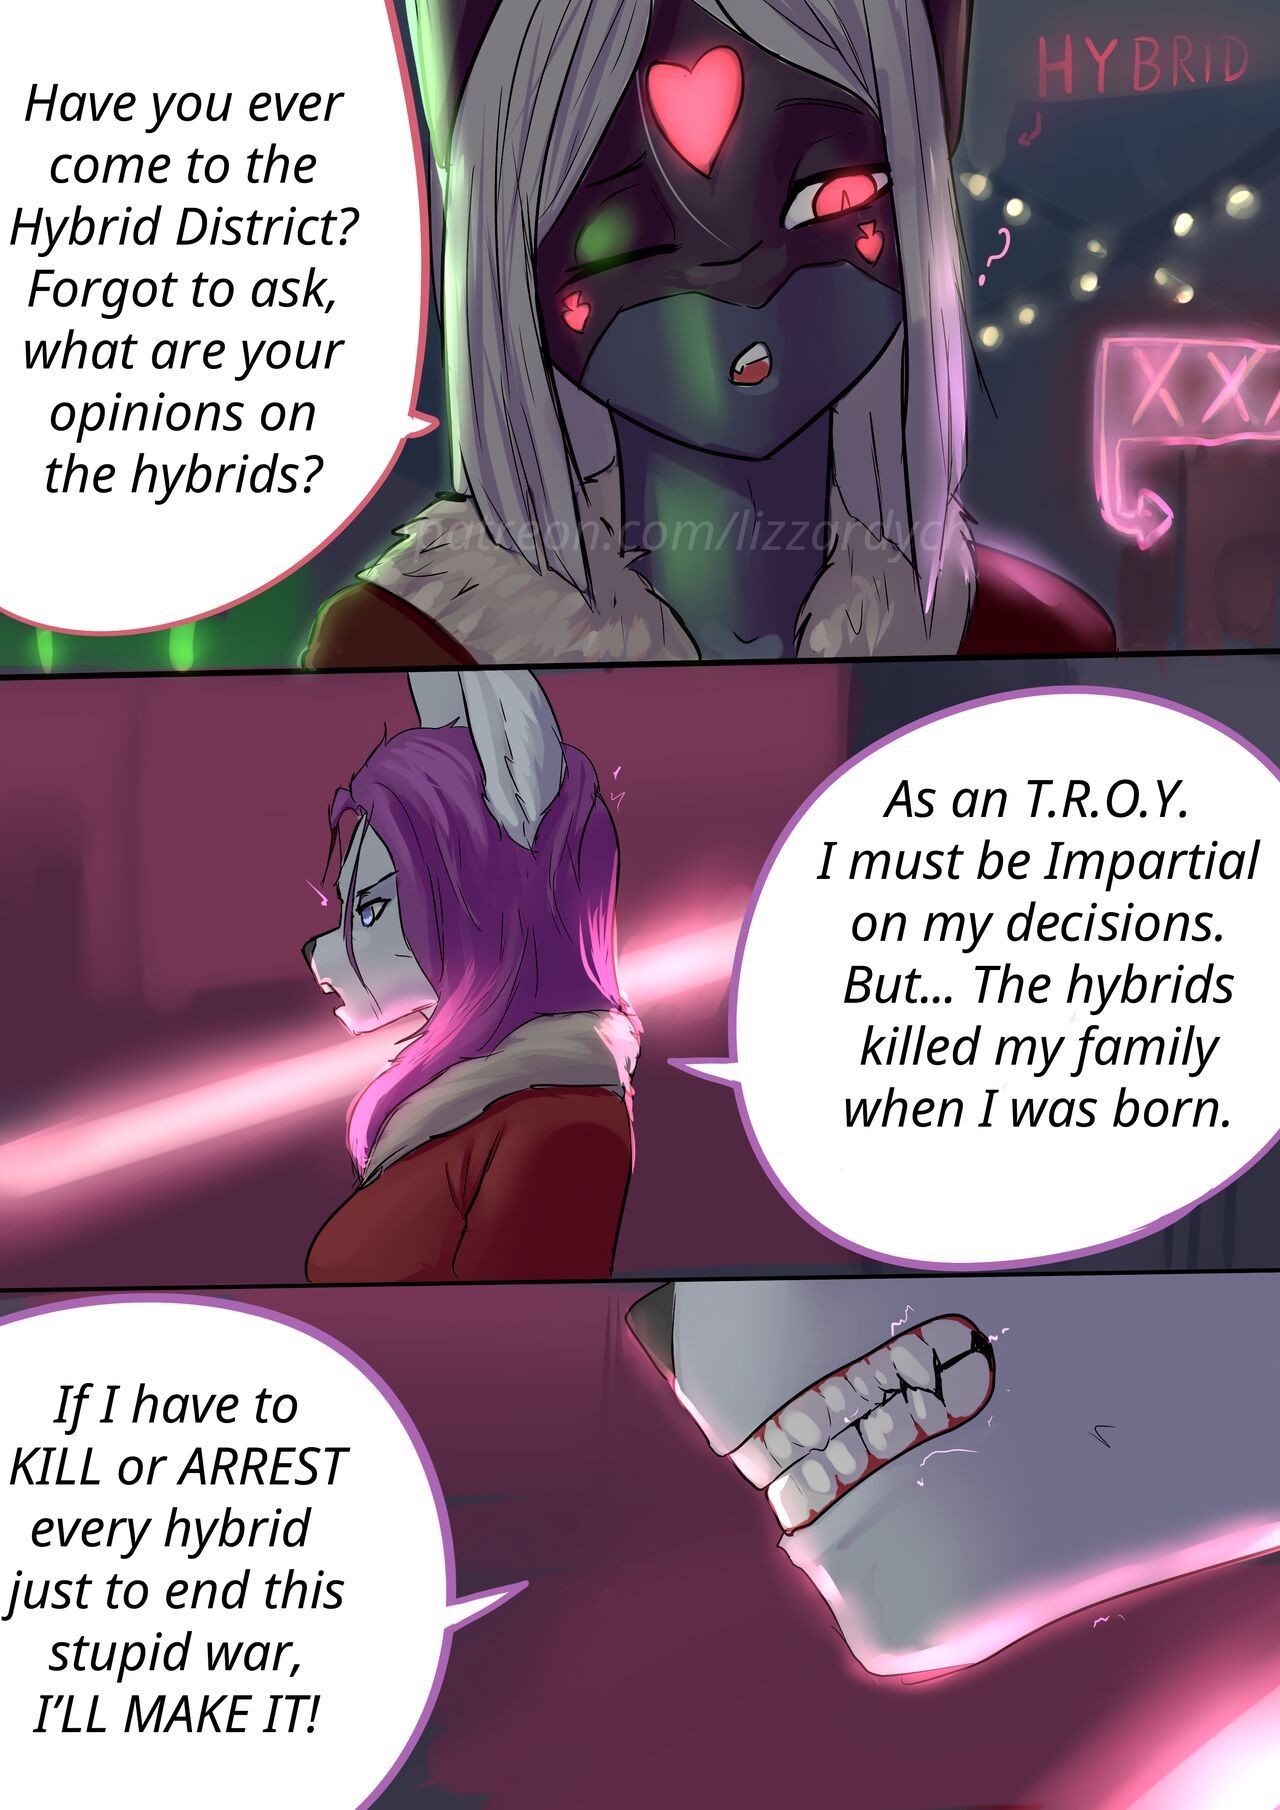 [LizzardYch] Don't Deal With Lizzy Part Two (Ongoing) 3